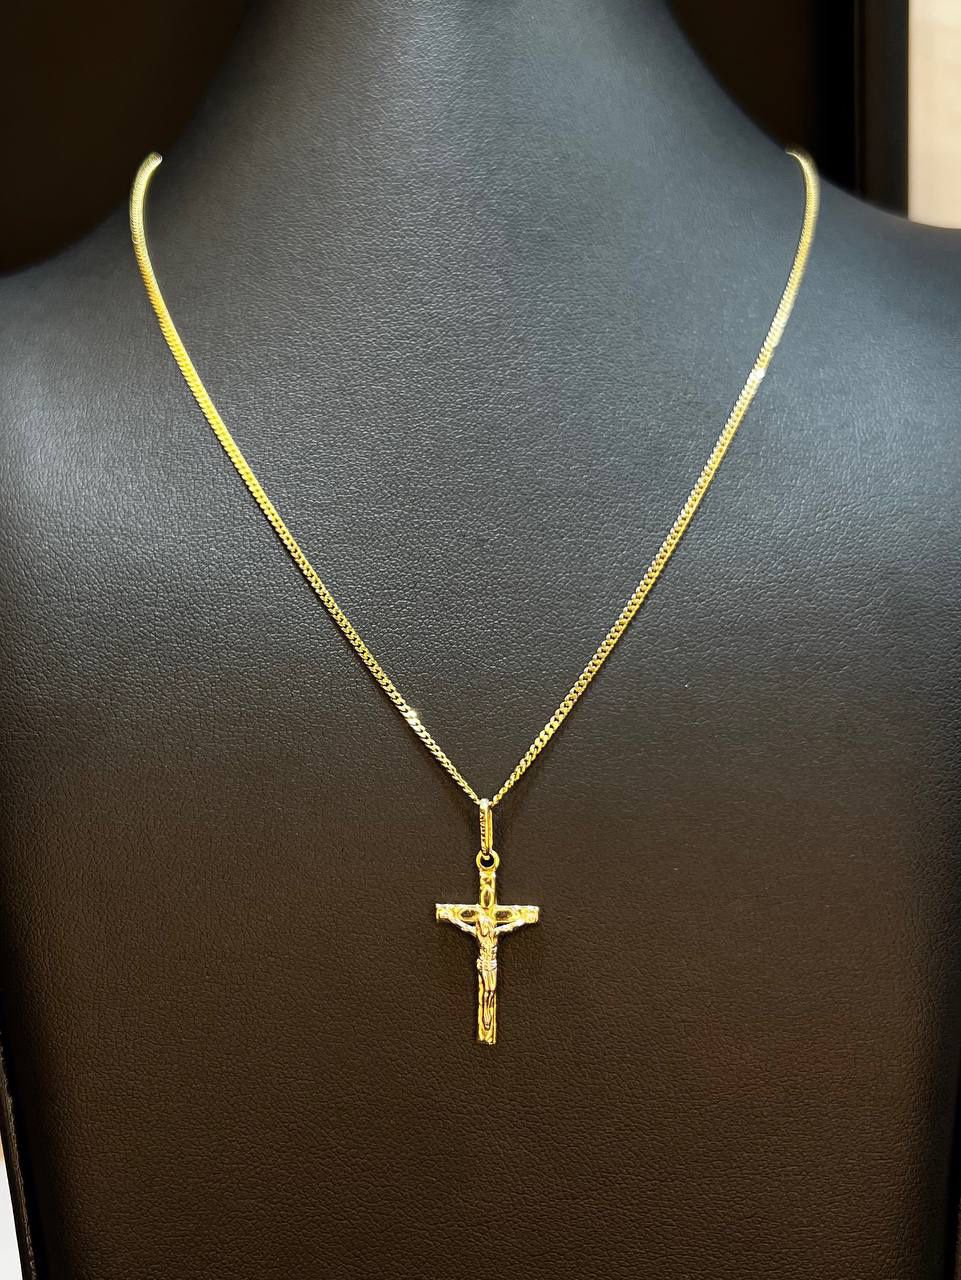 14k yellow gold chain with cross